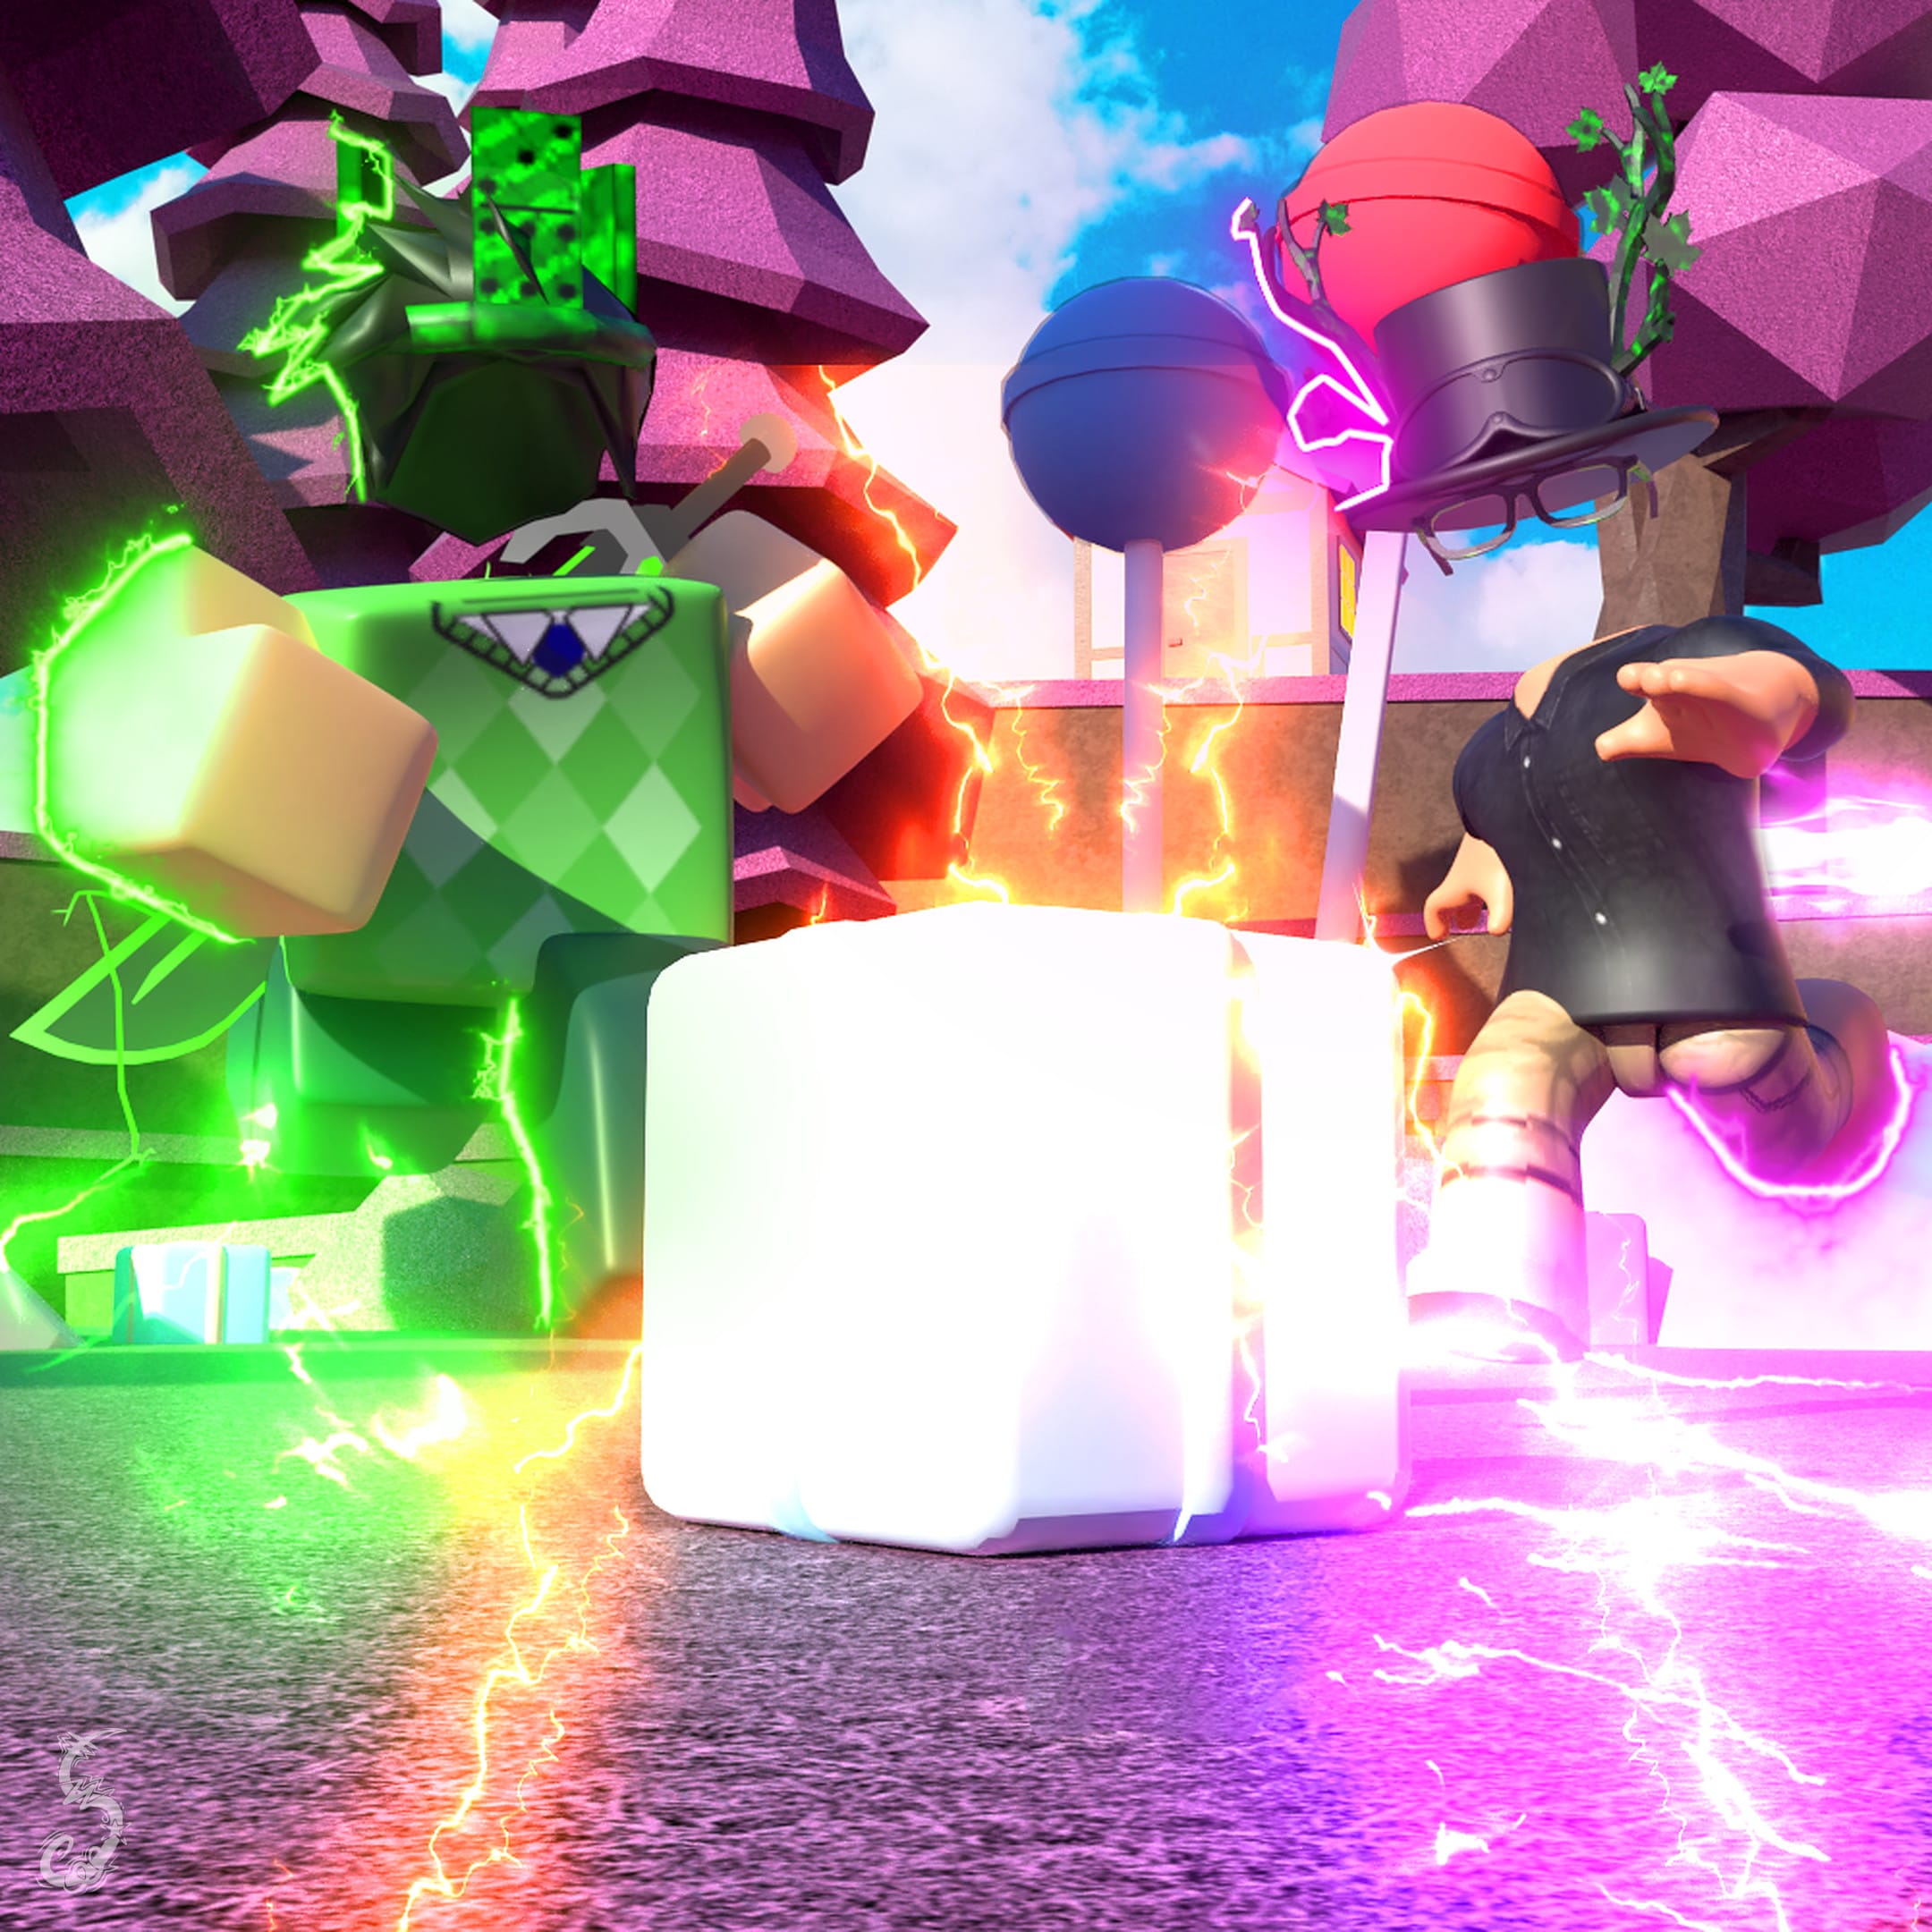 KisuRorensu on X: All Star Tower Defense Update GFX - Commissioned by:  @FruitySama - Discord Link:  - Game Link:   - Like and Retweets are appreciated #Roblox  #robloxart #robloxGFX #RobloxDev